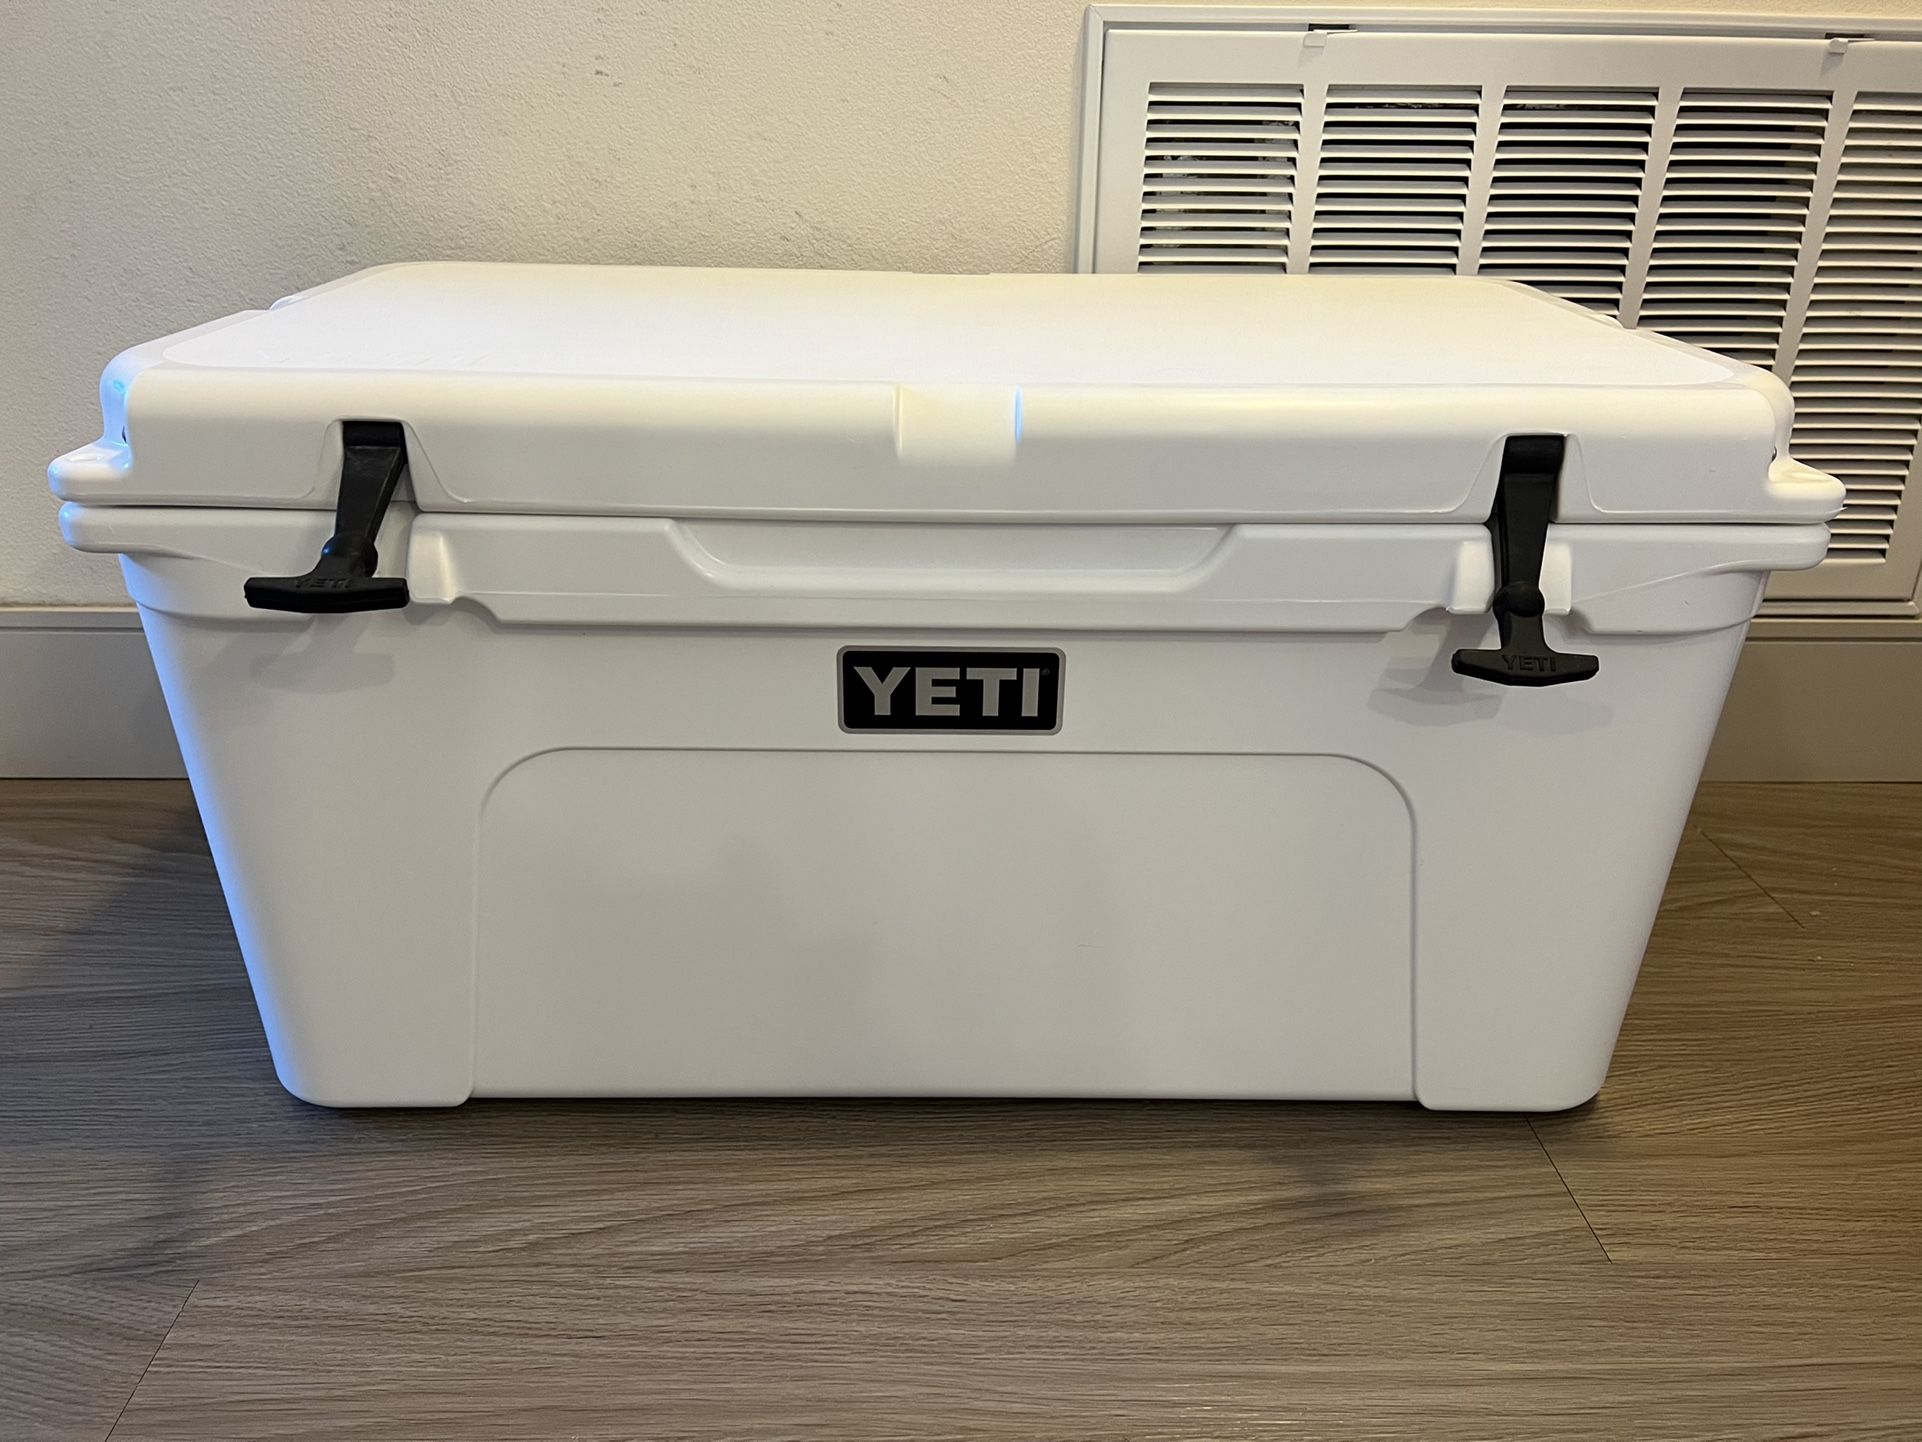 Yeti 65 Cooler - $275 FIRM - NO NEGOTIATIONS - CASH ONLY